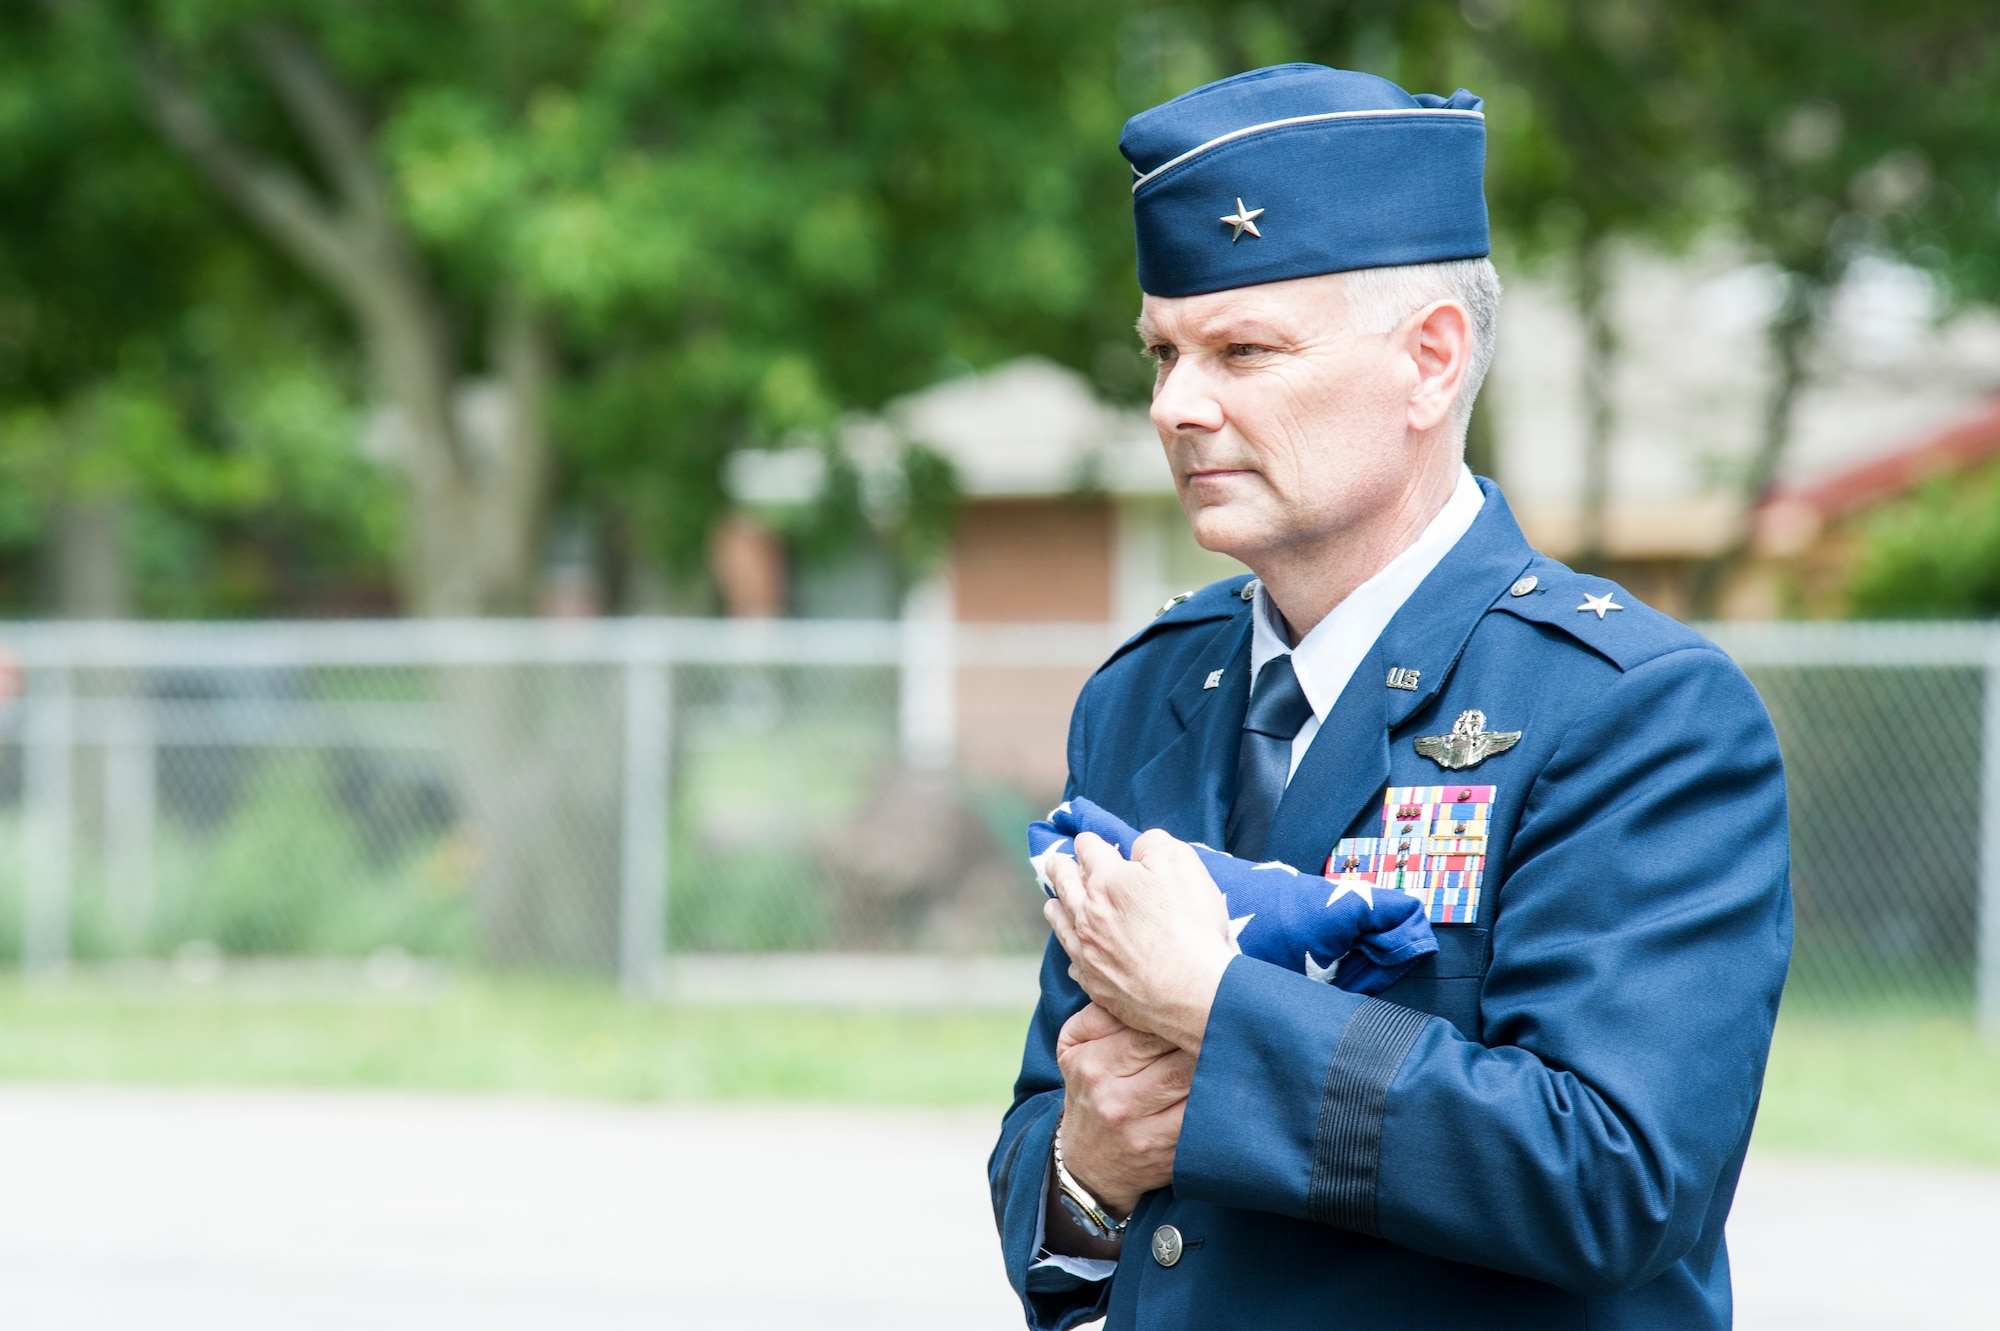 U.S. Air Force Brig. Gen. Glen VanHerck, right, 509th Bomb Wing commander, holds a flag honoring the sacrifice of 2nd Lt. George Whiteman May 16, 2015, during the annual wreath-laying ceremony in Sedalia, Mo. VanHerck’s first assignment as a young lieutenant was to the 44th Fighter Squadron, a descendant of the unit that Whiteman was assigned to when he died after his plane was shot down Dec. 7, 1941, during the attack on Pearl Harbor. (U.S. Air Force photo by Staff Sgt. Brigitte N. Brantley/Released)